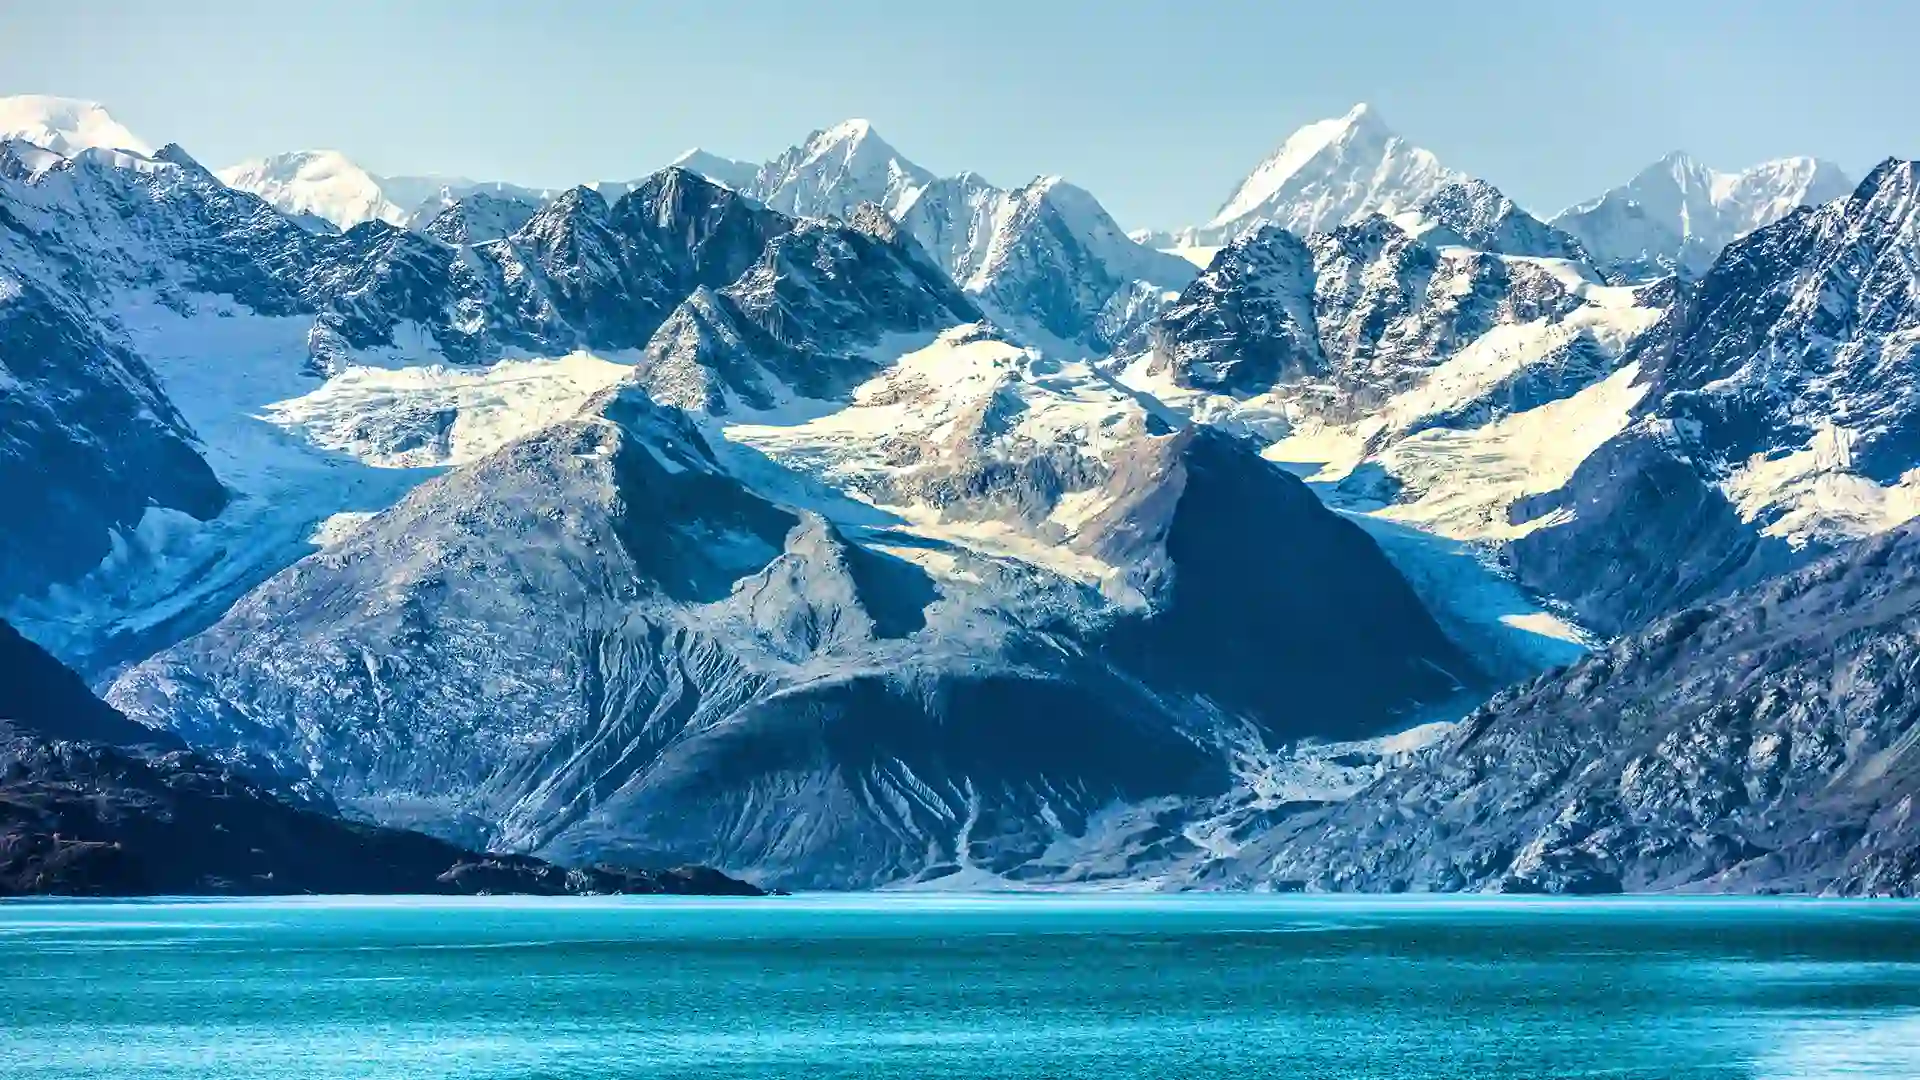 View of Glacier Bay National Park in Alaska, with its snowcapped towering mountain range, along the bright blue shoreline.